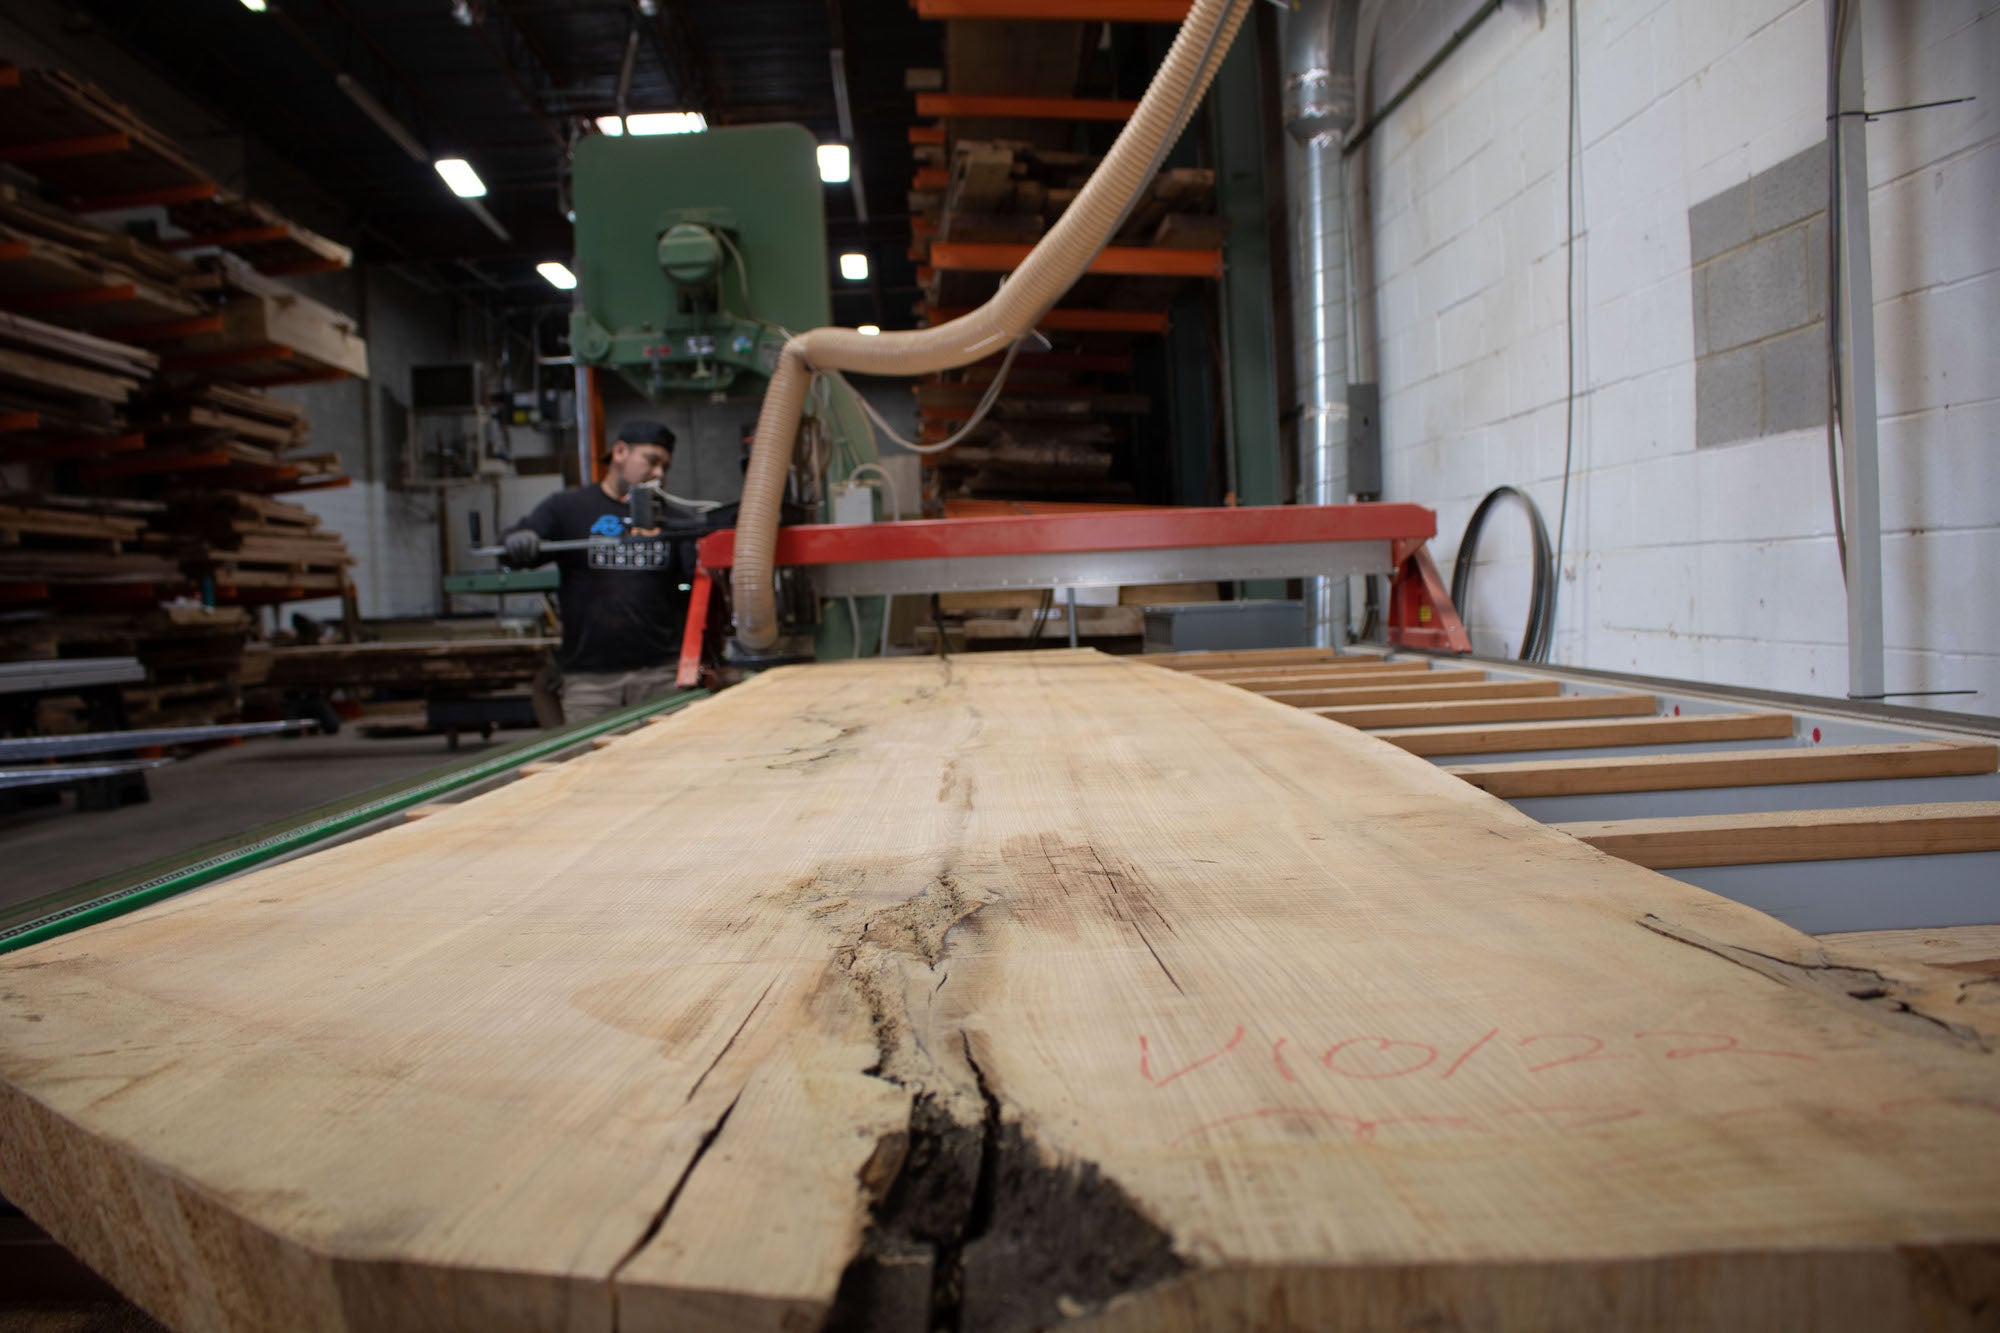 Behind The City Table: Q&A With Cambium Carbon on Their Carbon-Smart Wood (6/27/2022)